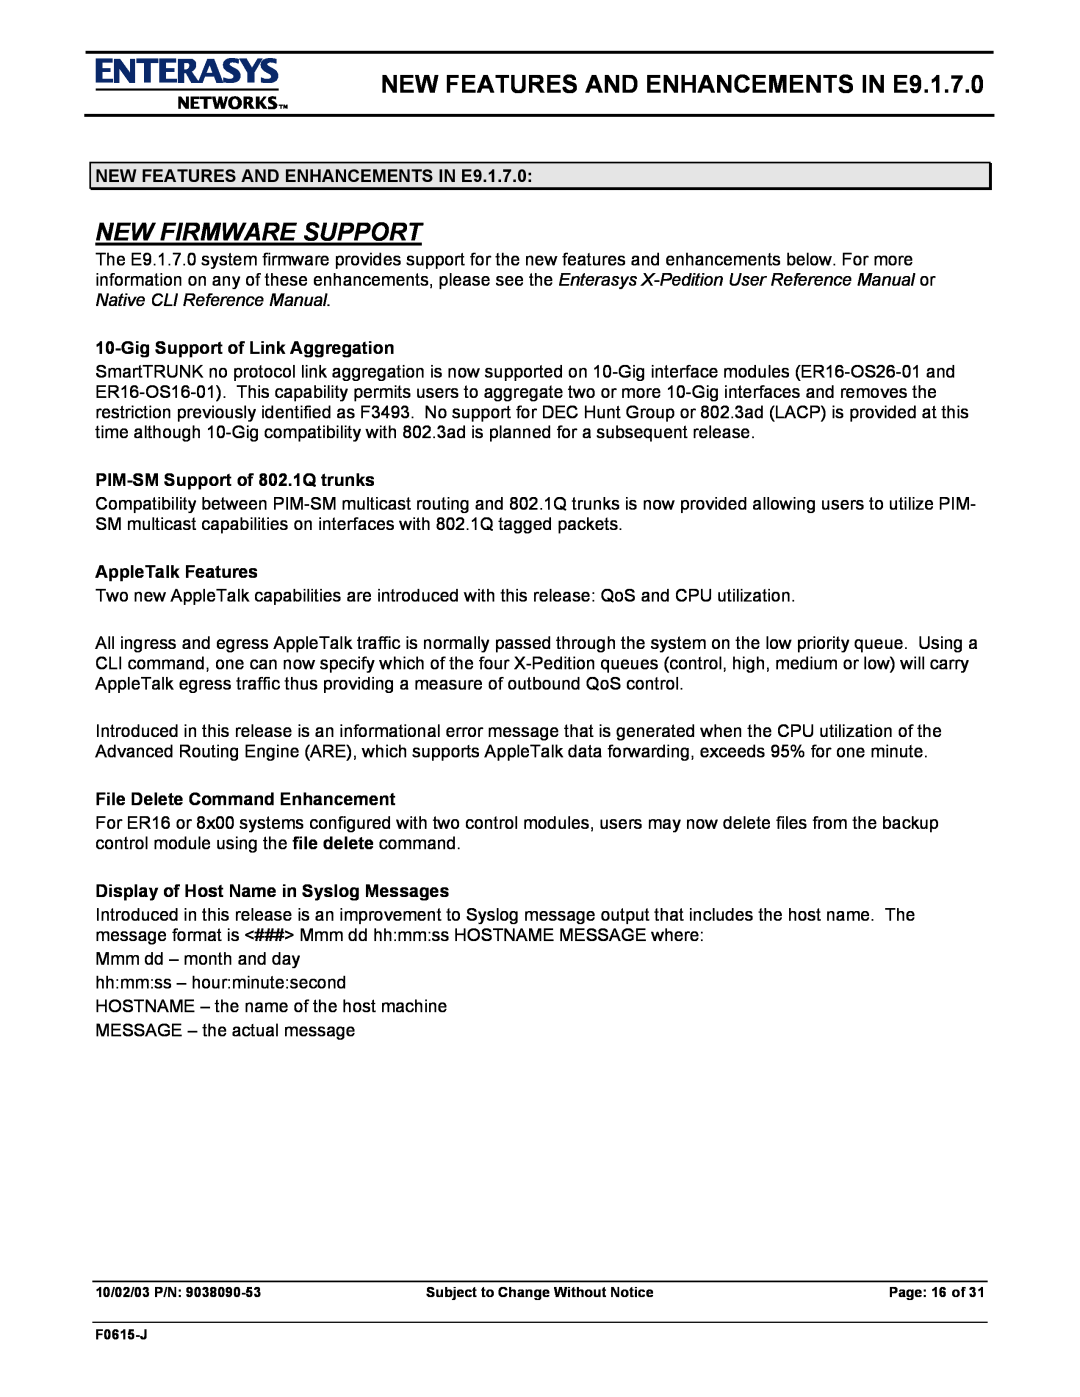 Enterasys Networks manual NEW FEATURES AND ENHANCEMENTS IN E9.1.7.0, New Firmware Support 